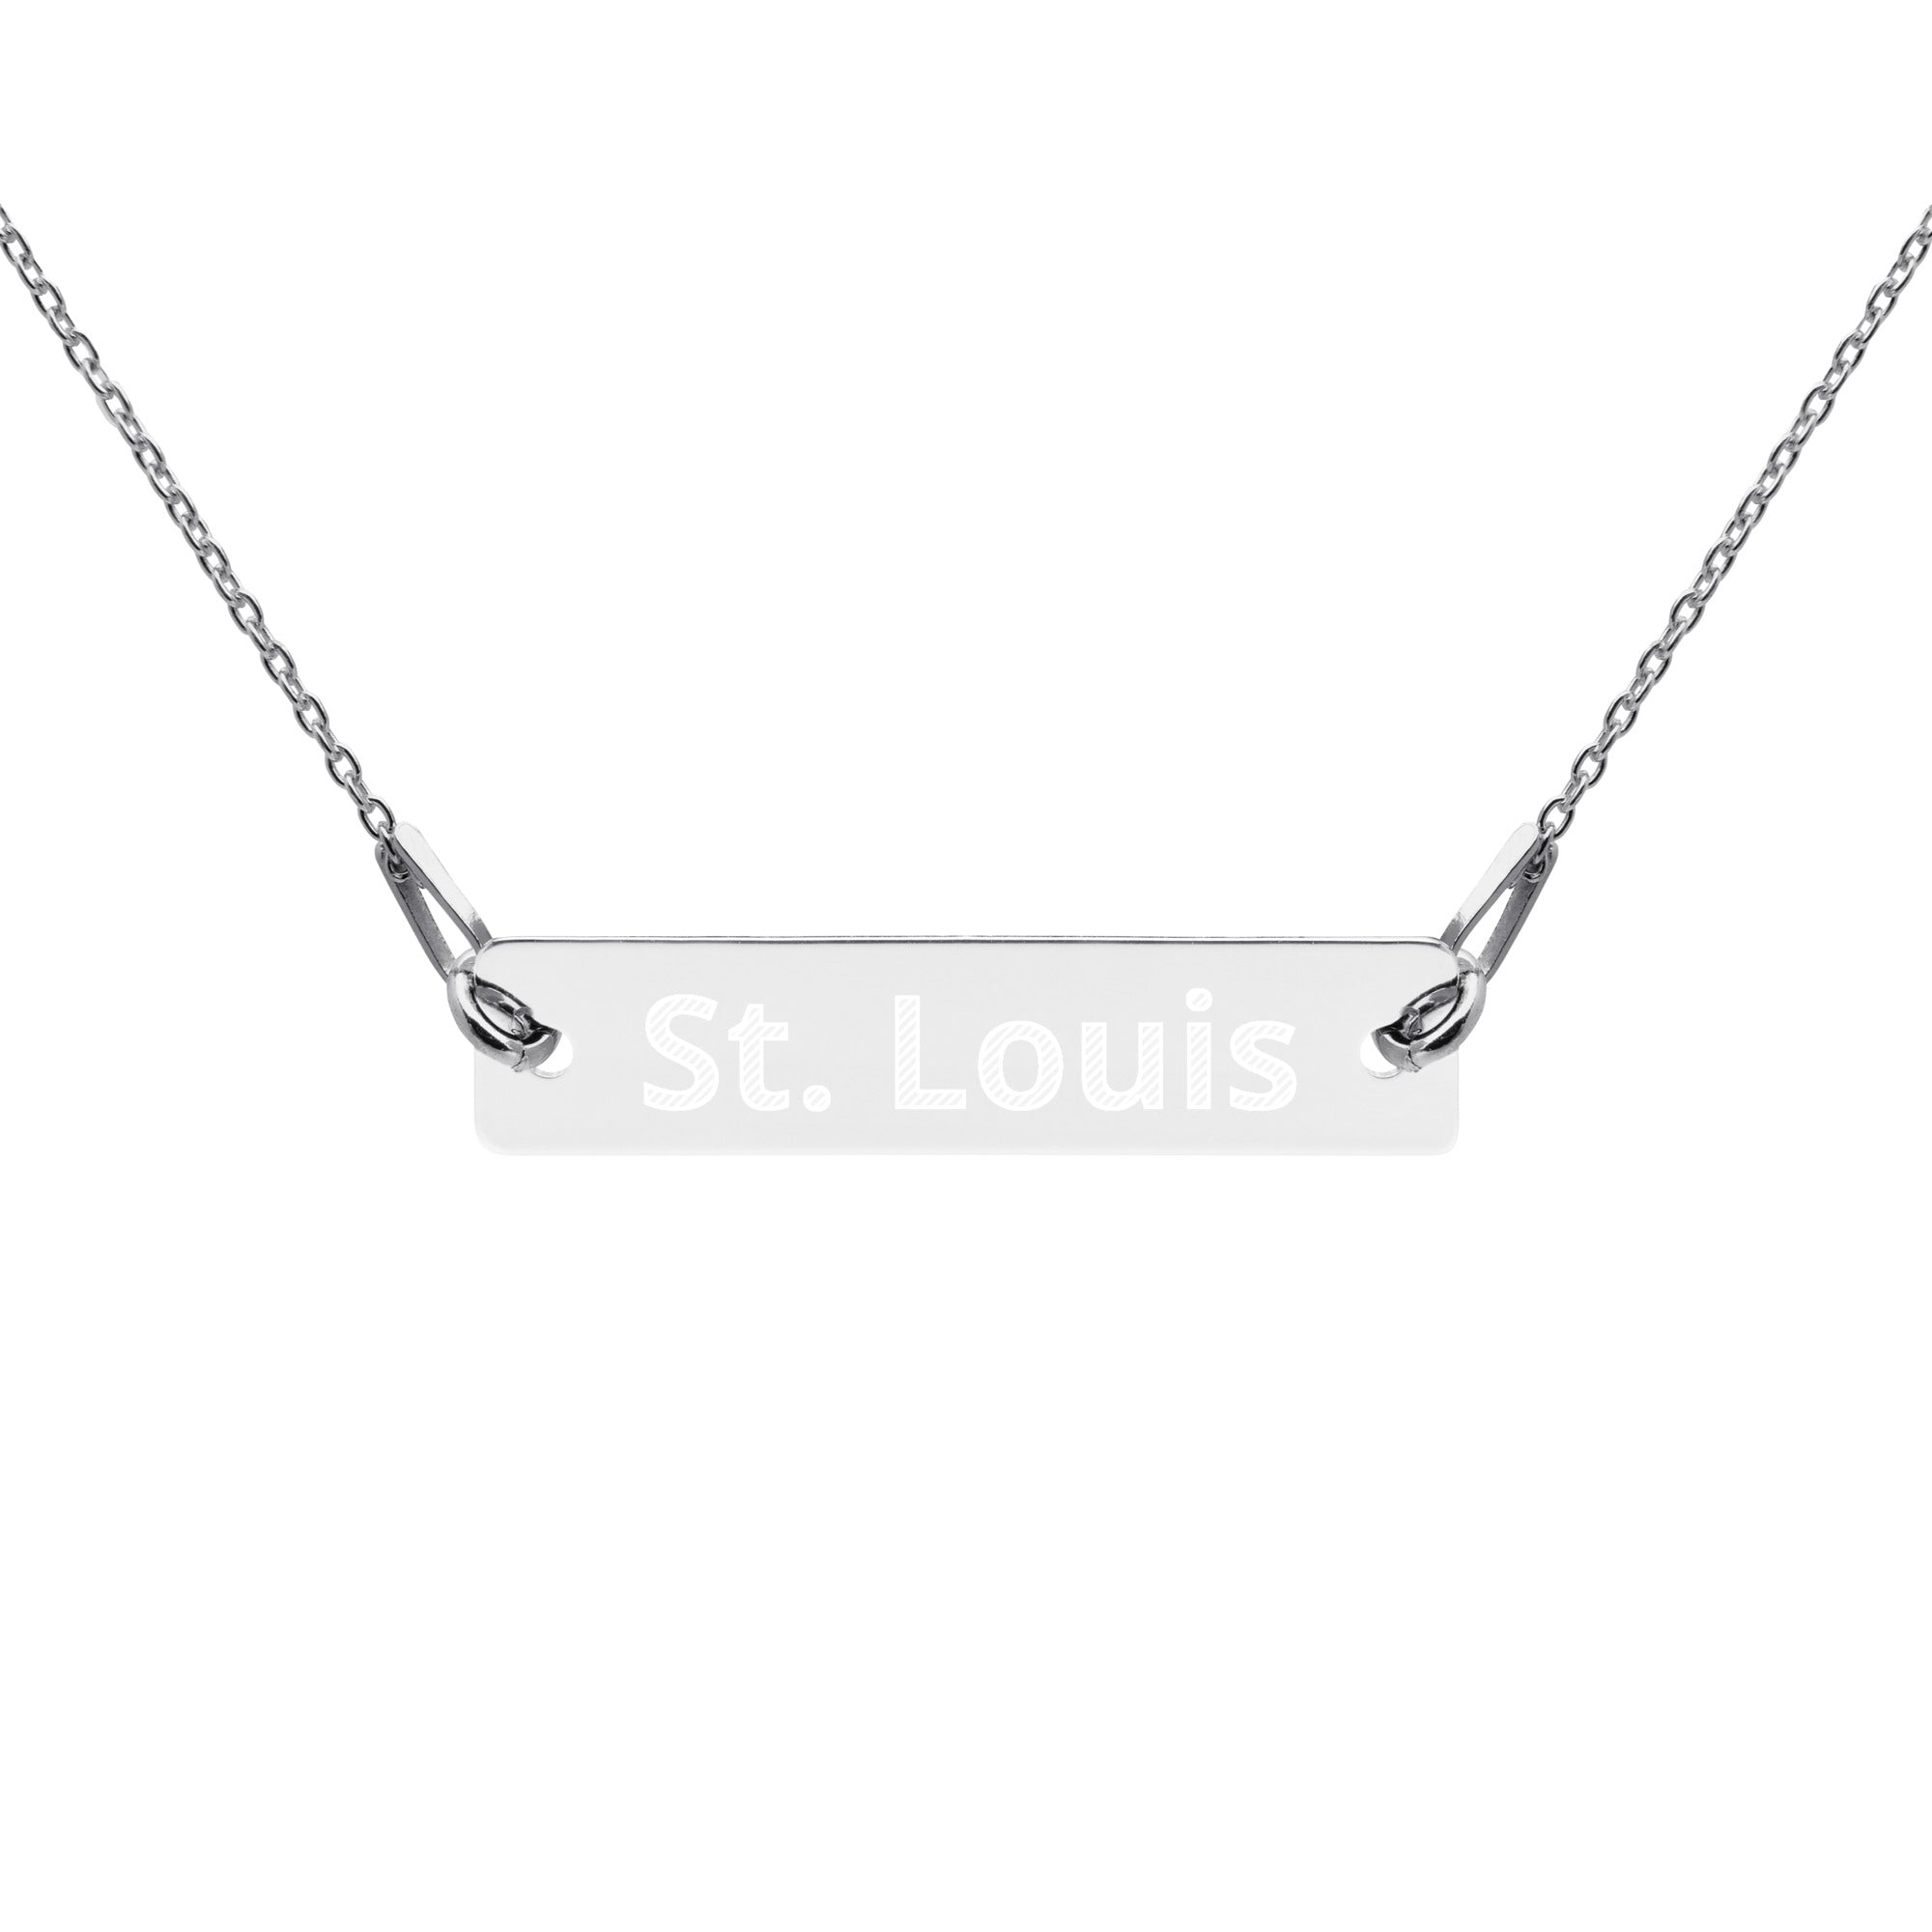 SLCS Engraved Silver Bar Chain Necklace